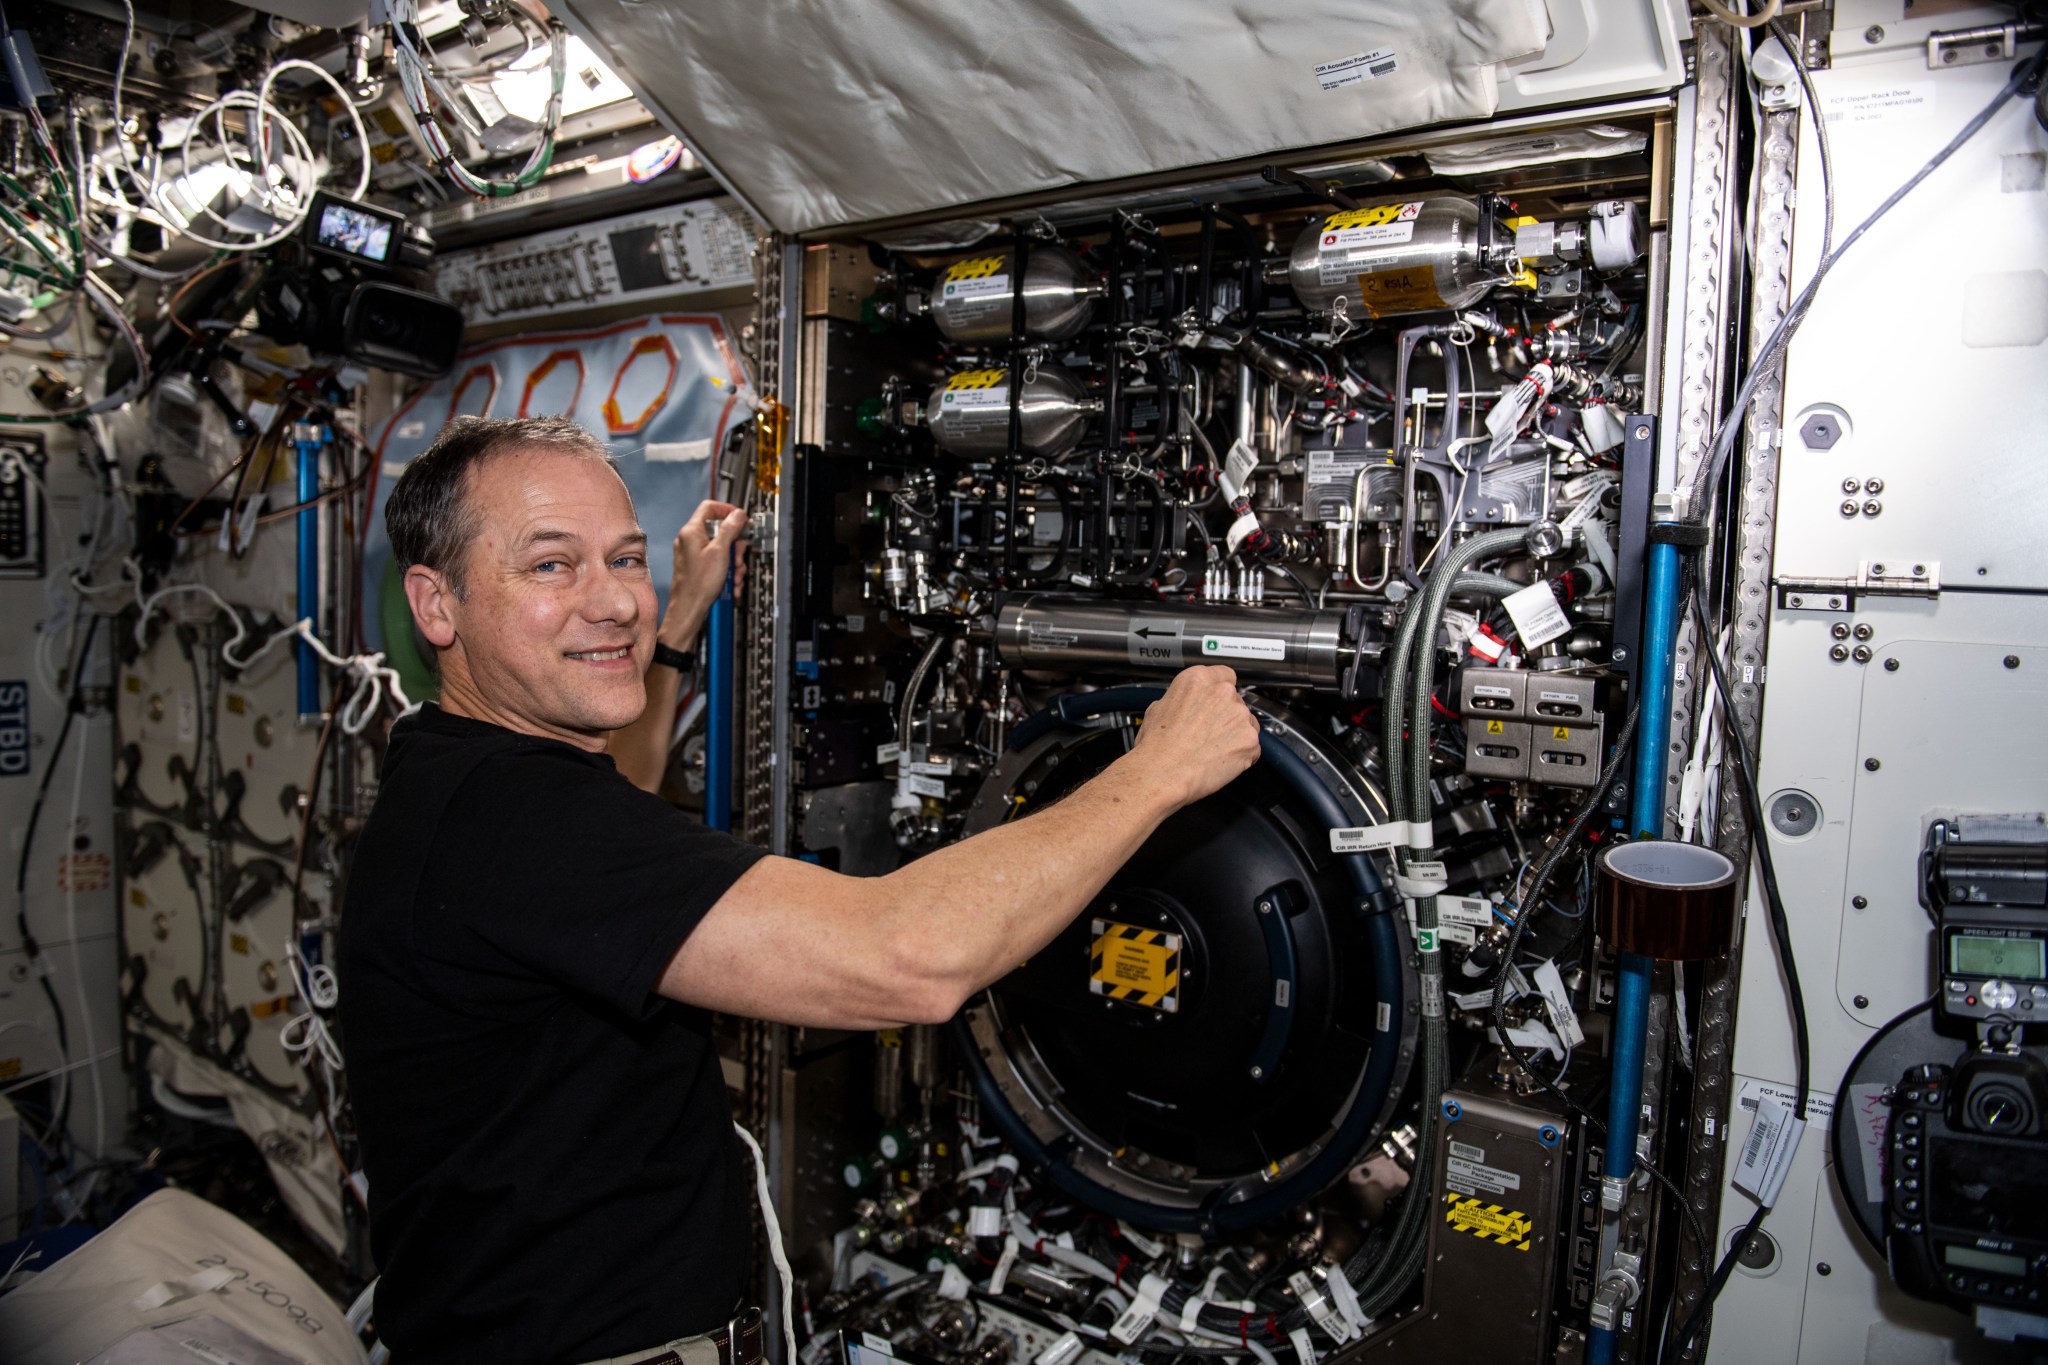 NASA astronaut and Expedition 66 Flight Engineer Tom Marshburn configures the International Space Station's Combustion Integrated Rack.